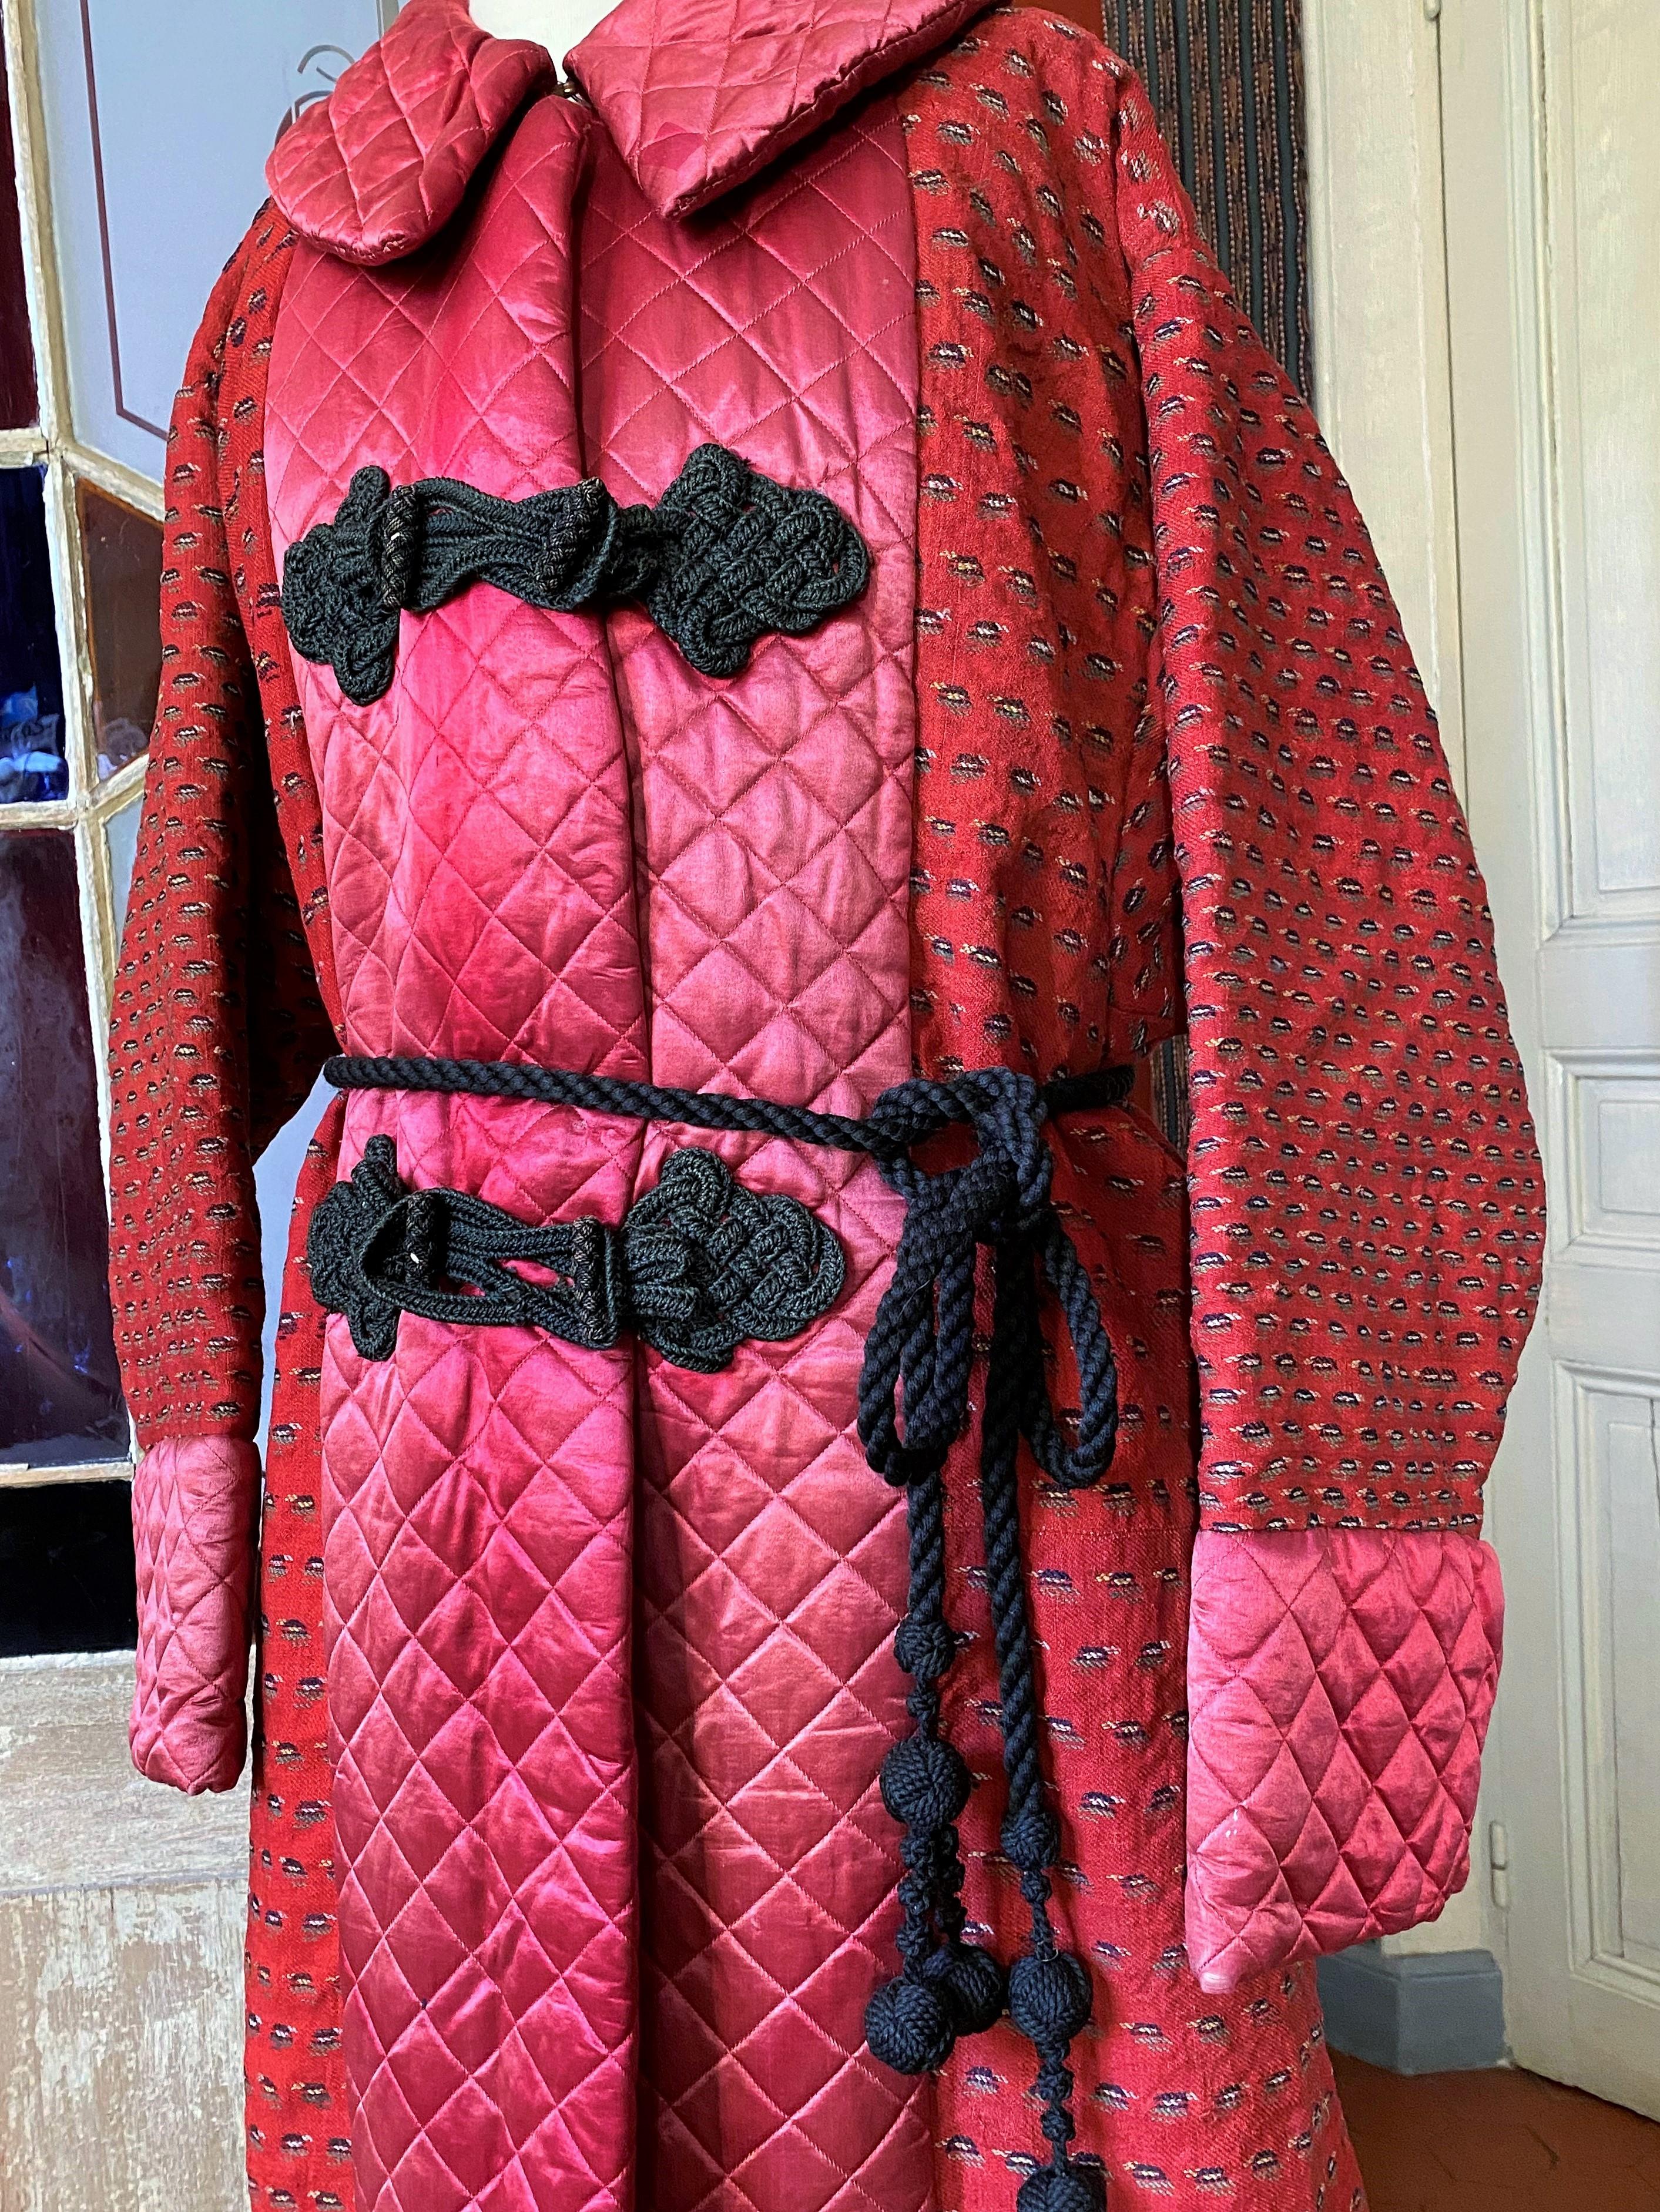 Circa 1865/1885
France
Amazing robe or male Banyan period Second Empire in cashmere and quilted satin. Wide cut with folded collar, crossed closure by beautiful passementerie of brandebourgs and cord to tie with black silk tassels. Background in